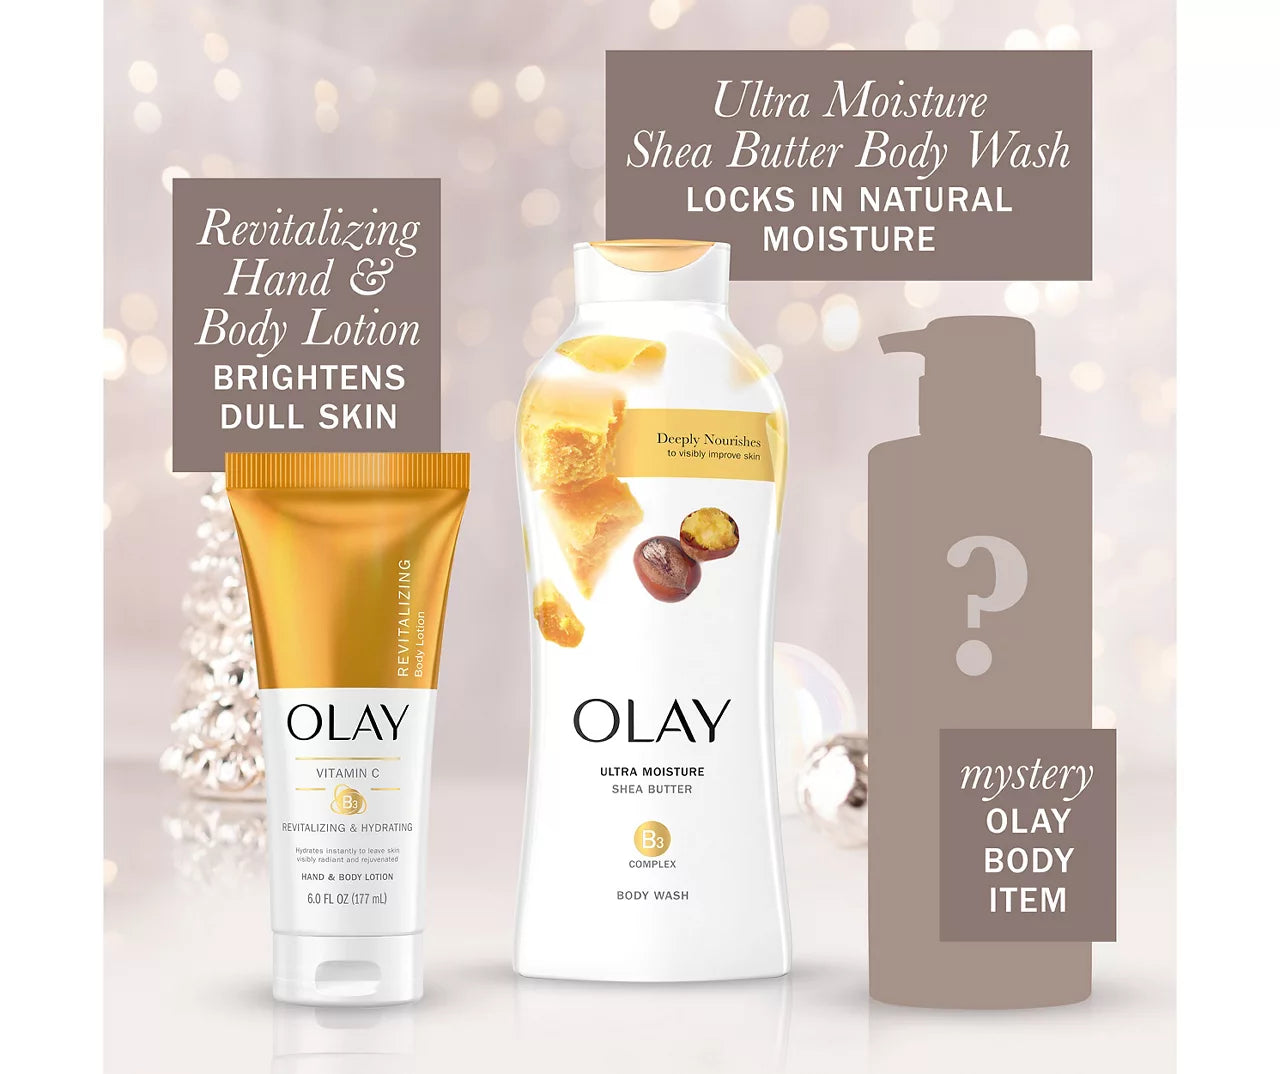 OLAY brightening holiday collection